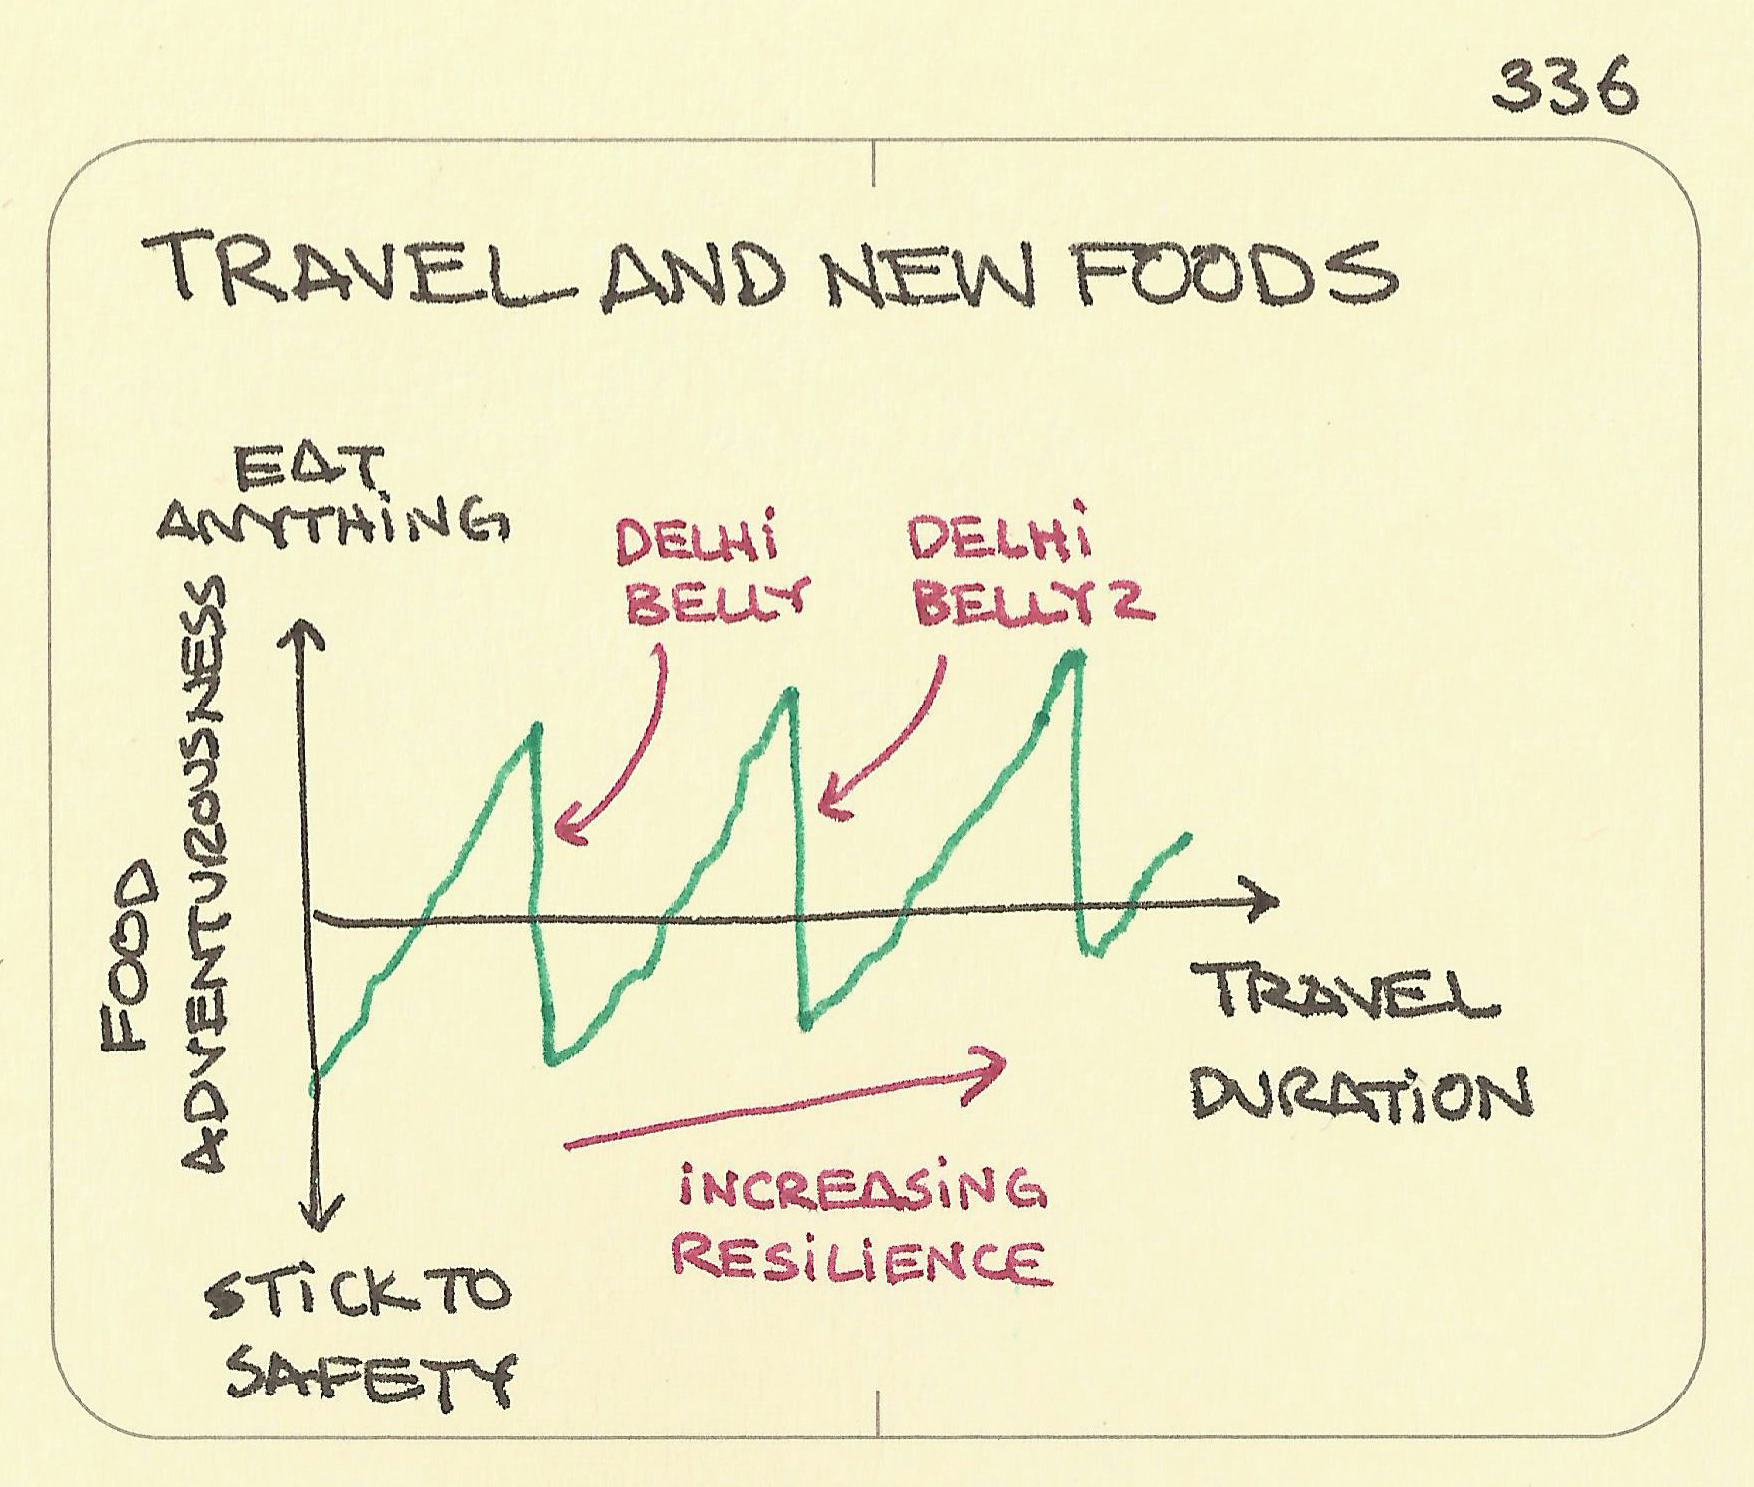 Travel and new foods - Sketchplanations